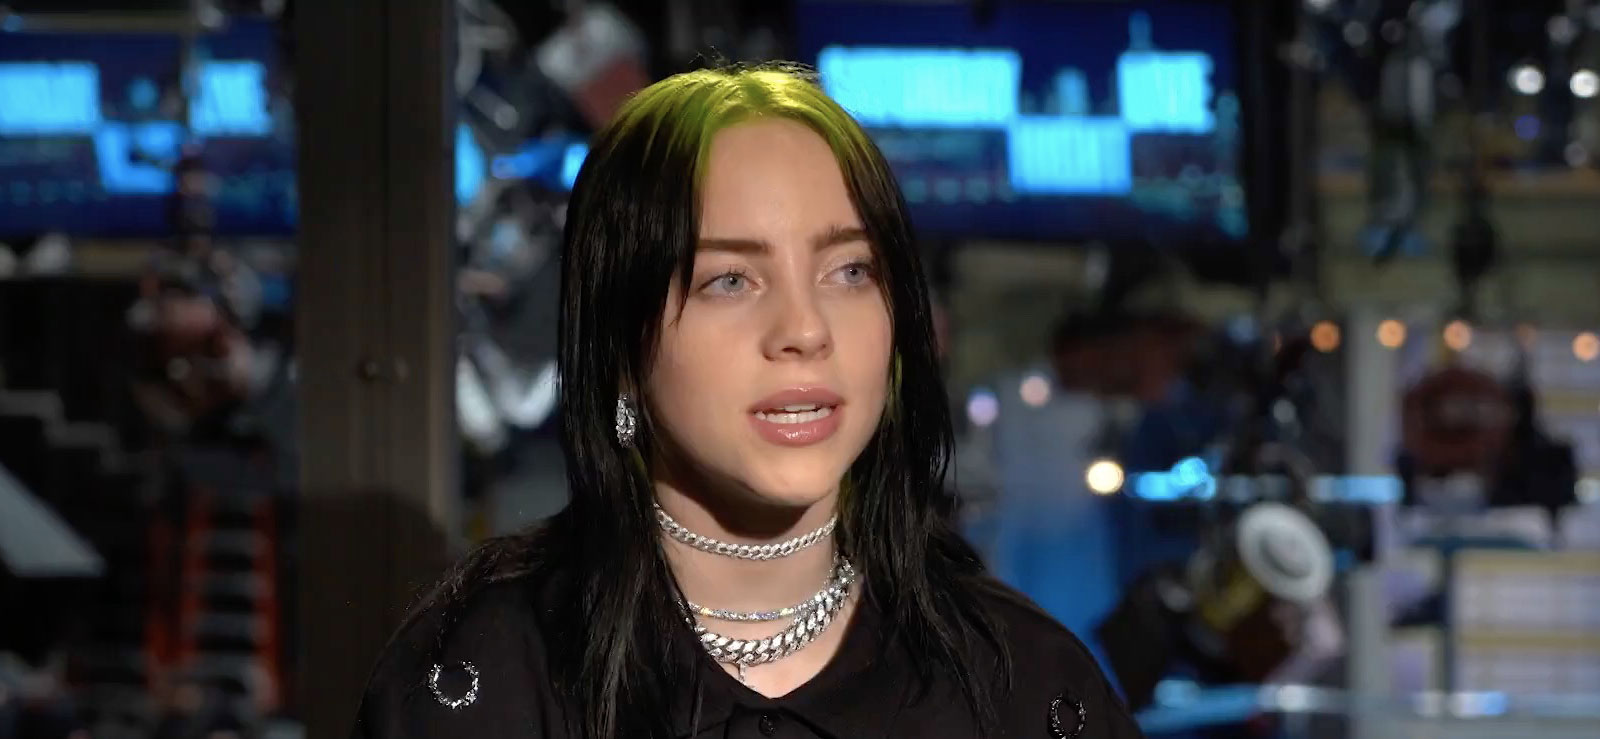 How Billie Eilish Walked on Walls for Her 'Bad Guy' Performance on SNL ...